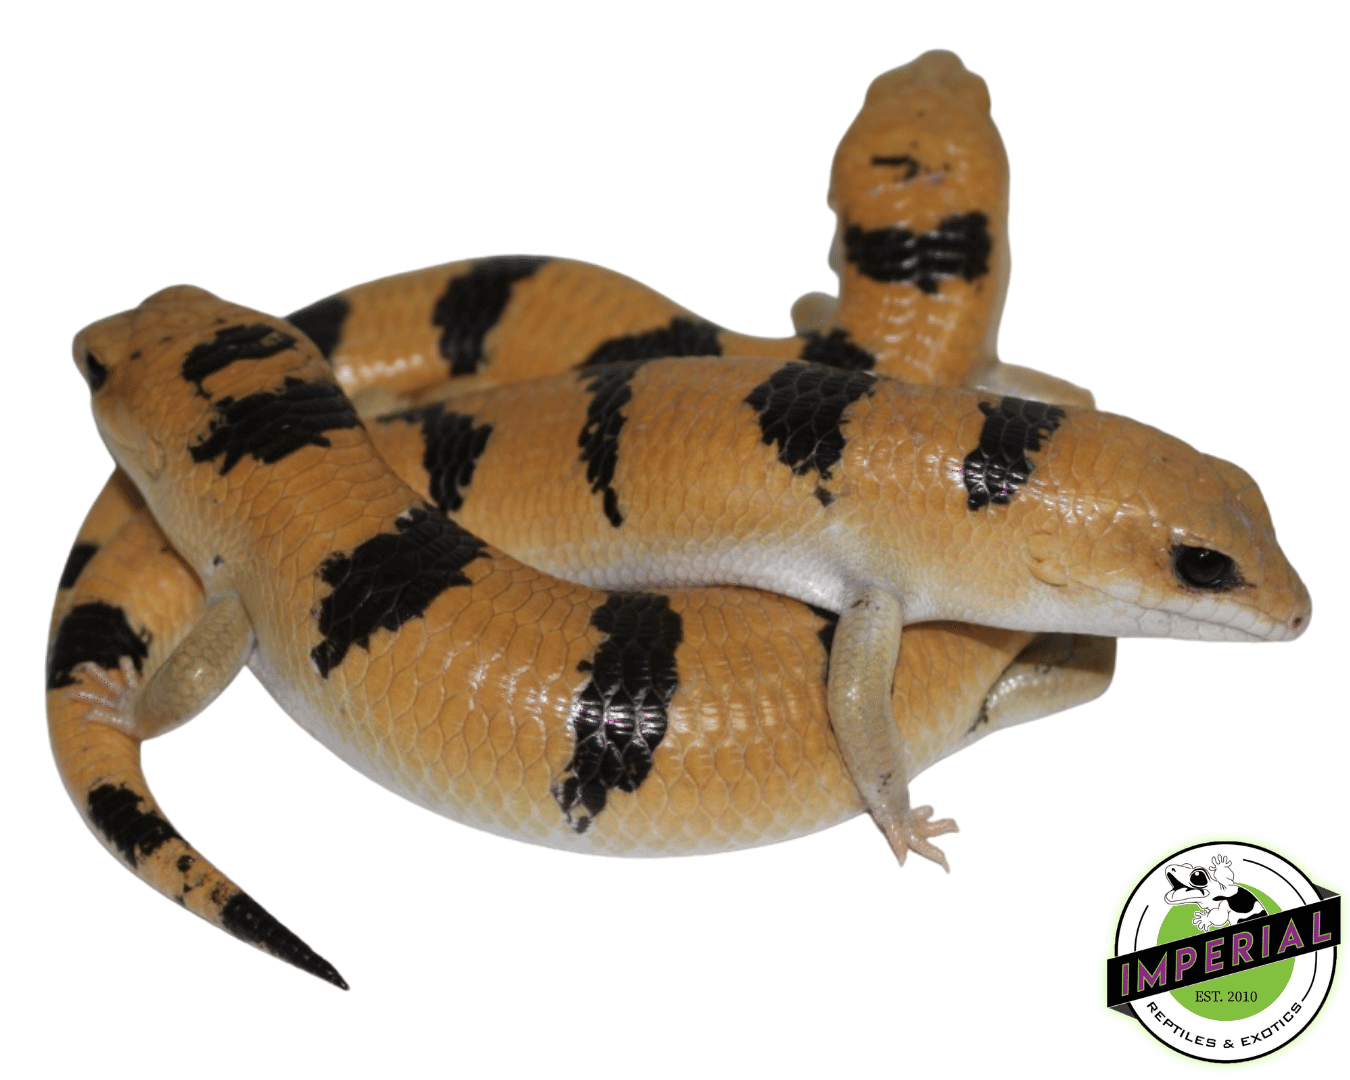 peters banded skink for sale, buy reptiles online